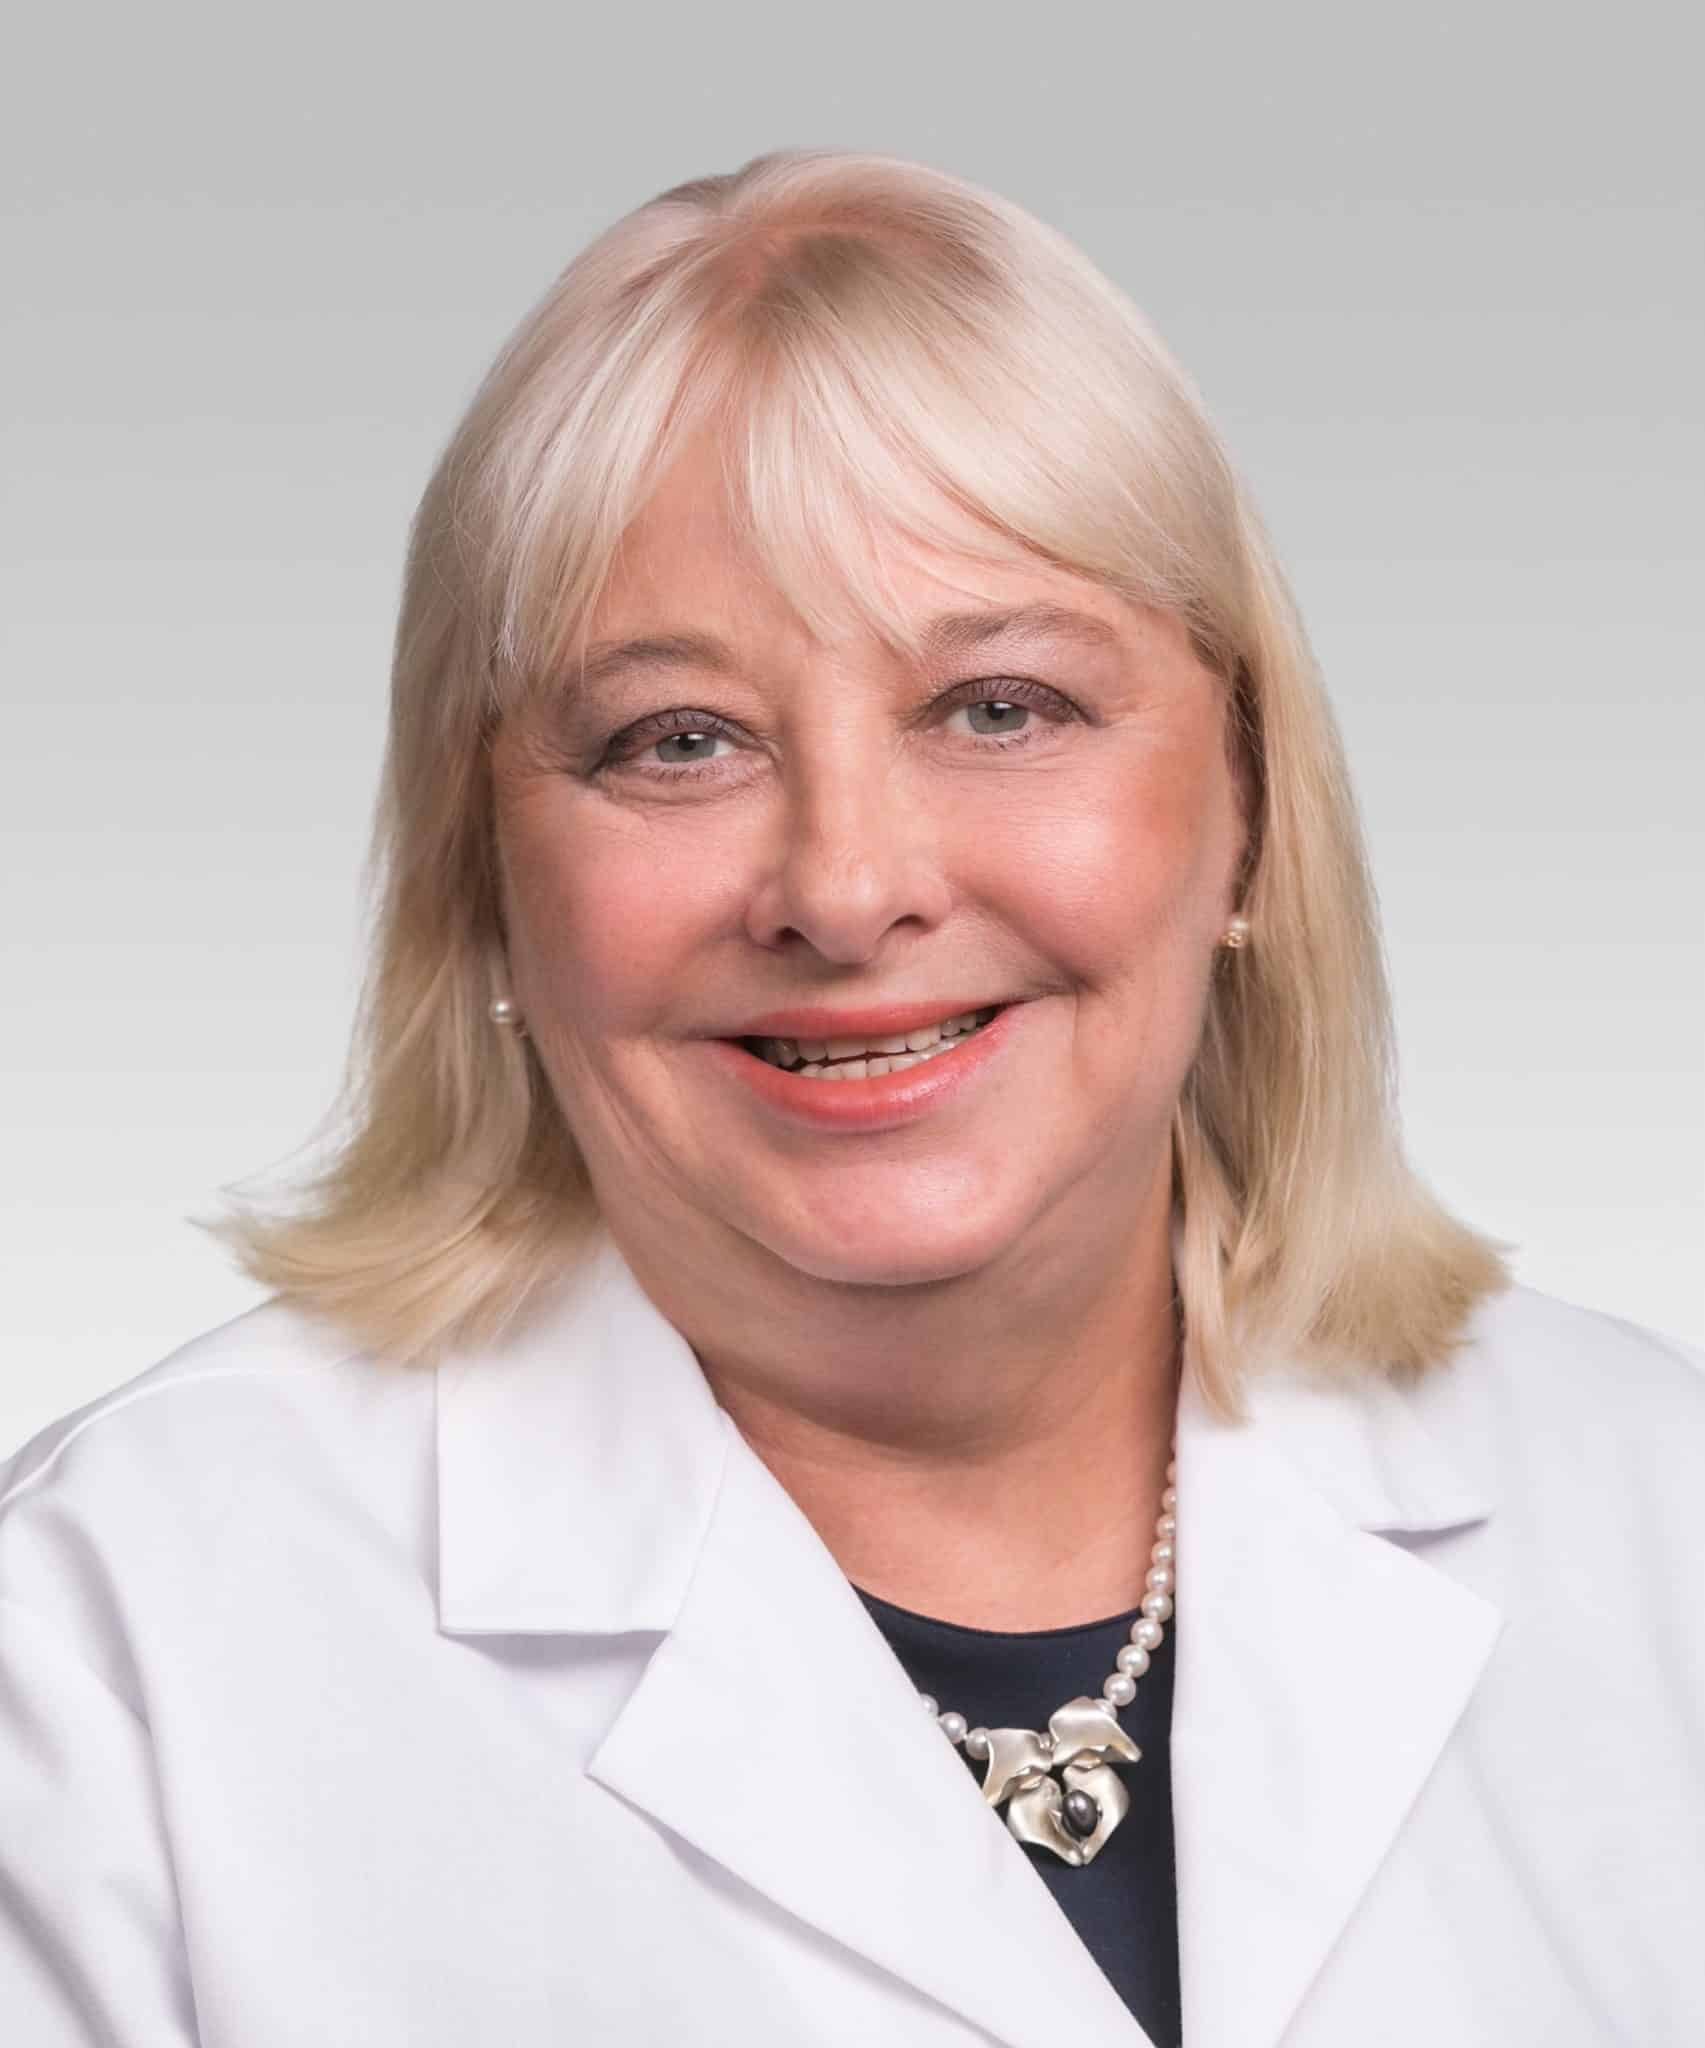 Moira Ariano, MD